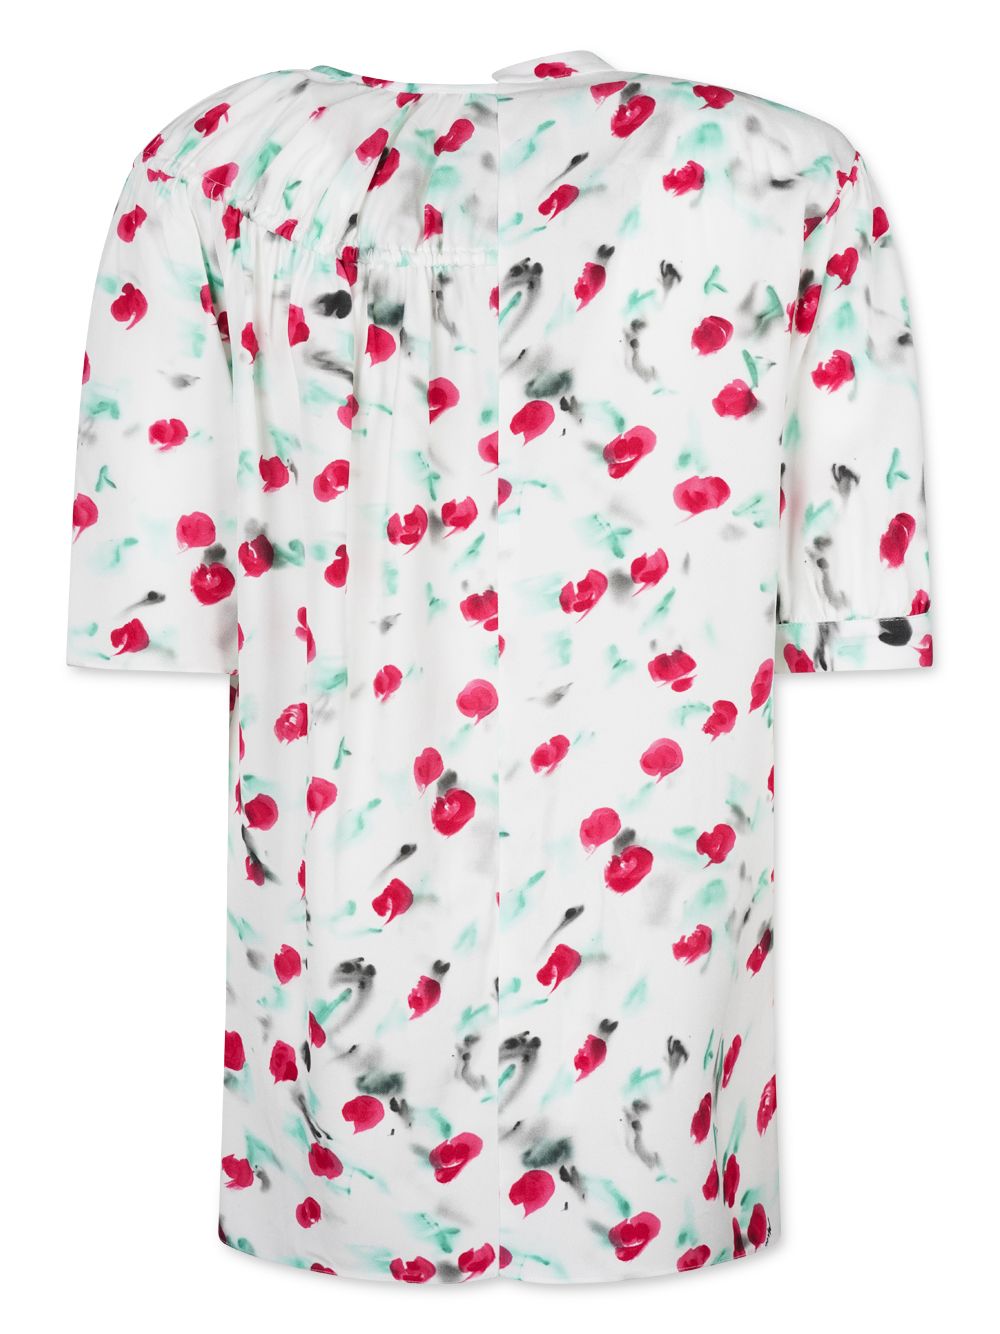 MARNI Floral Print Cotton Top for Women